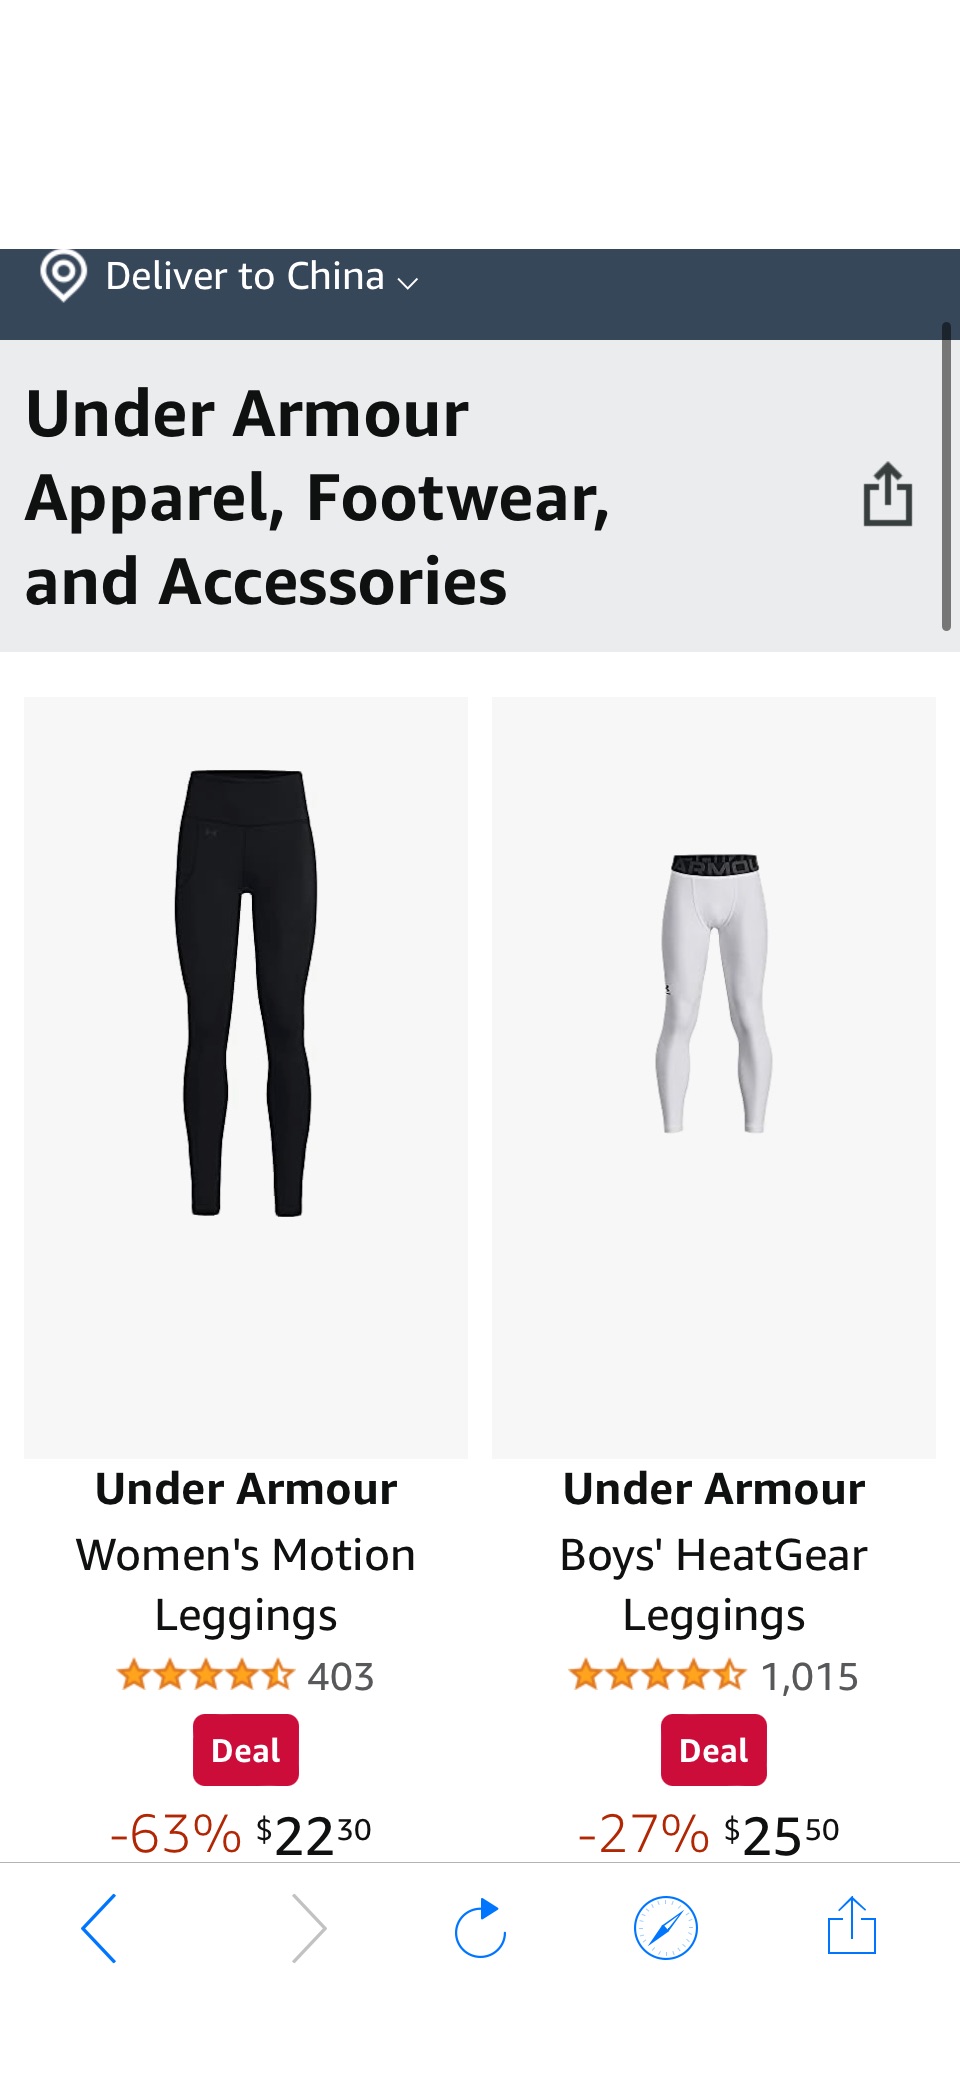 Under Armour Apparel, Footwear, and Accessories促销23起